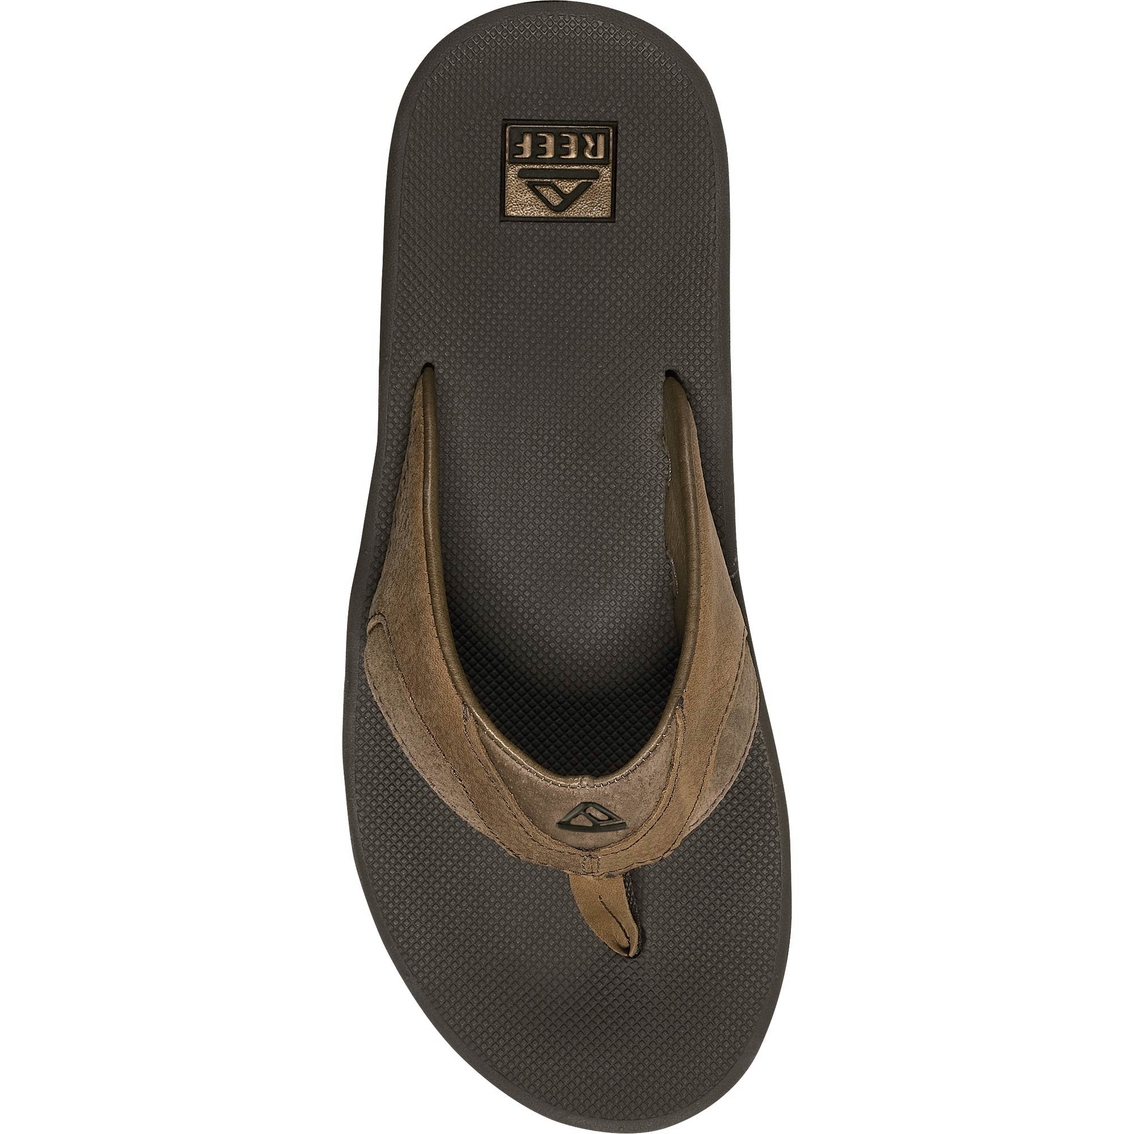 reef leather fanning slippers